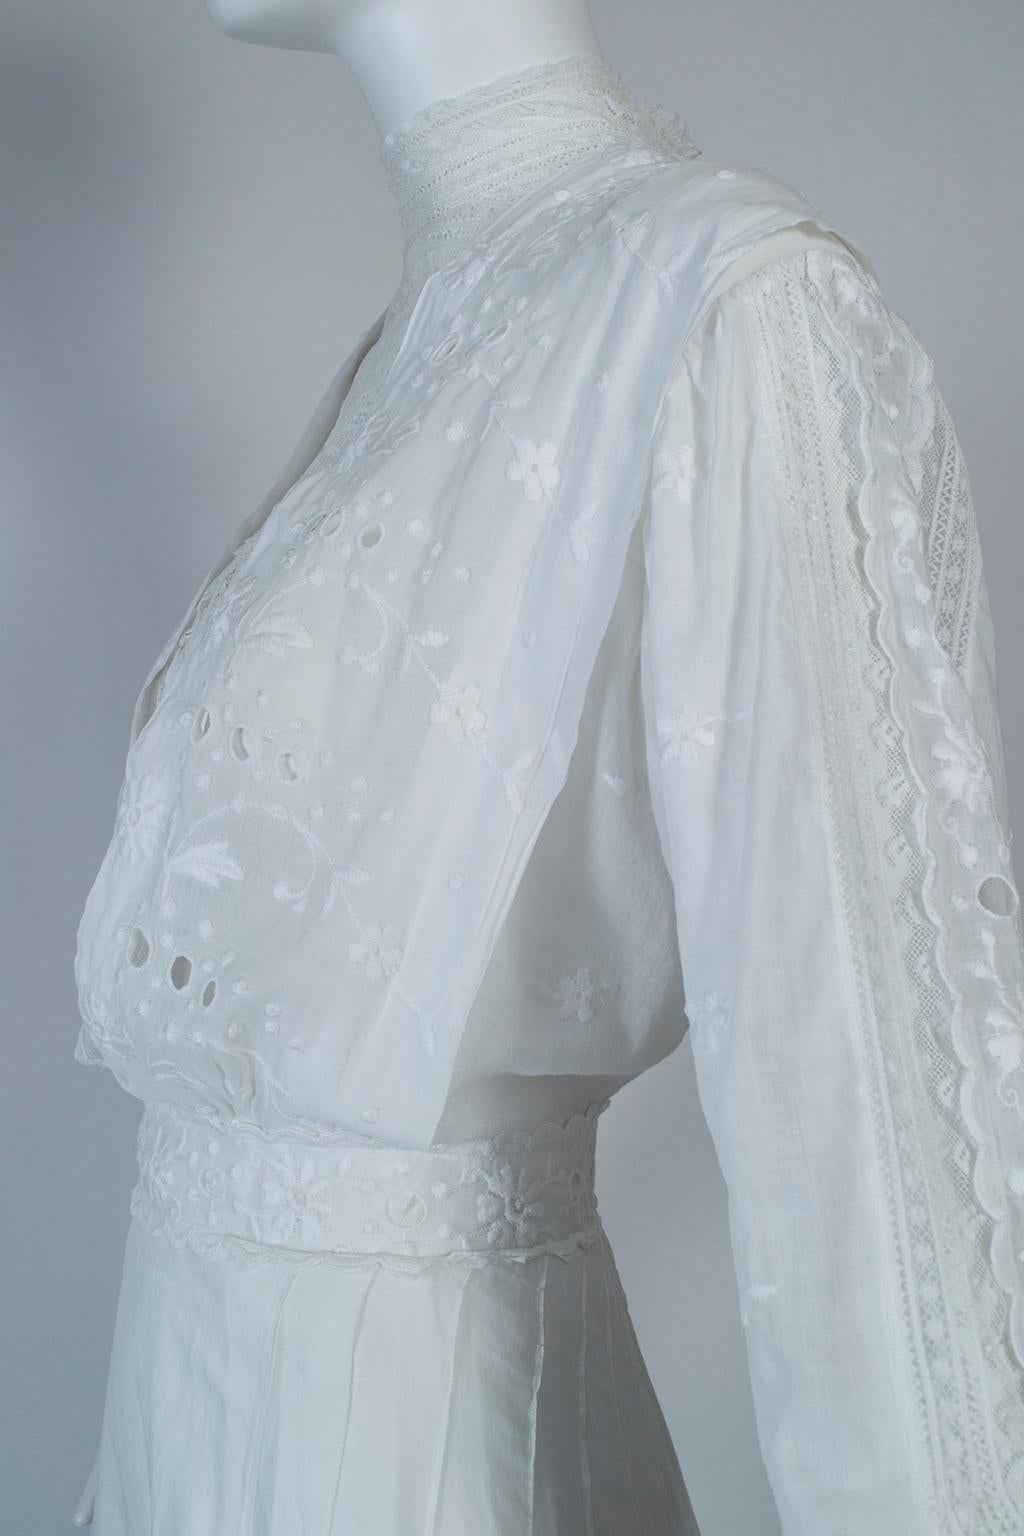 Gray Victorian White Eyelet and Lace Shoulder Pleat Afternoon Tea Dress - M, 1880s